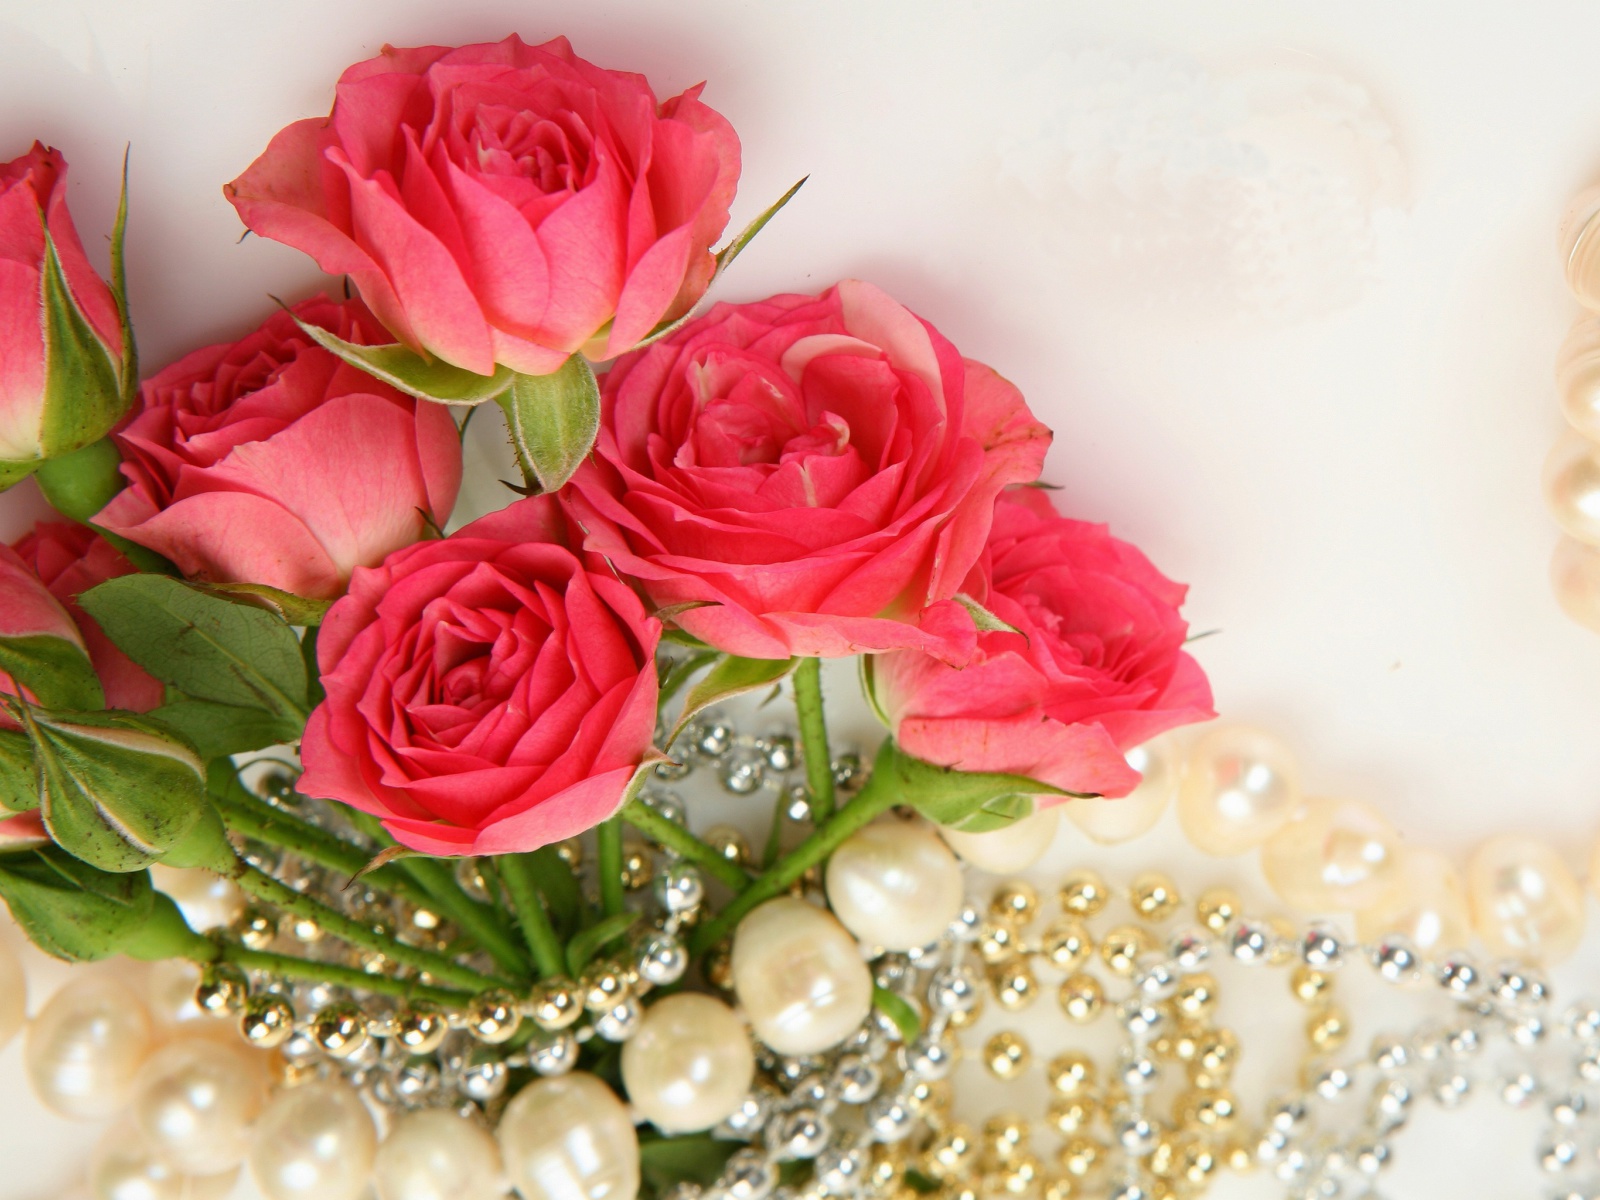 Necklace and Roses Bouquet wallpaper 1600x1200